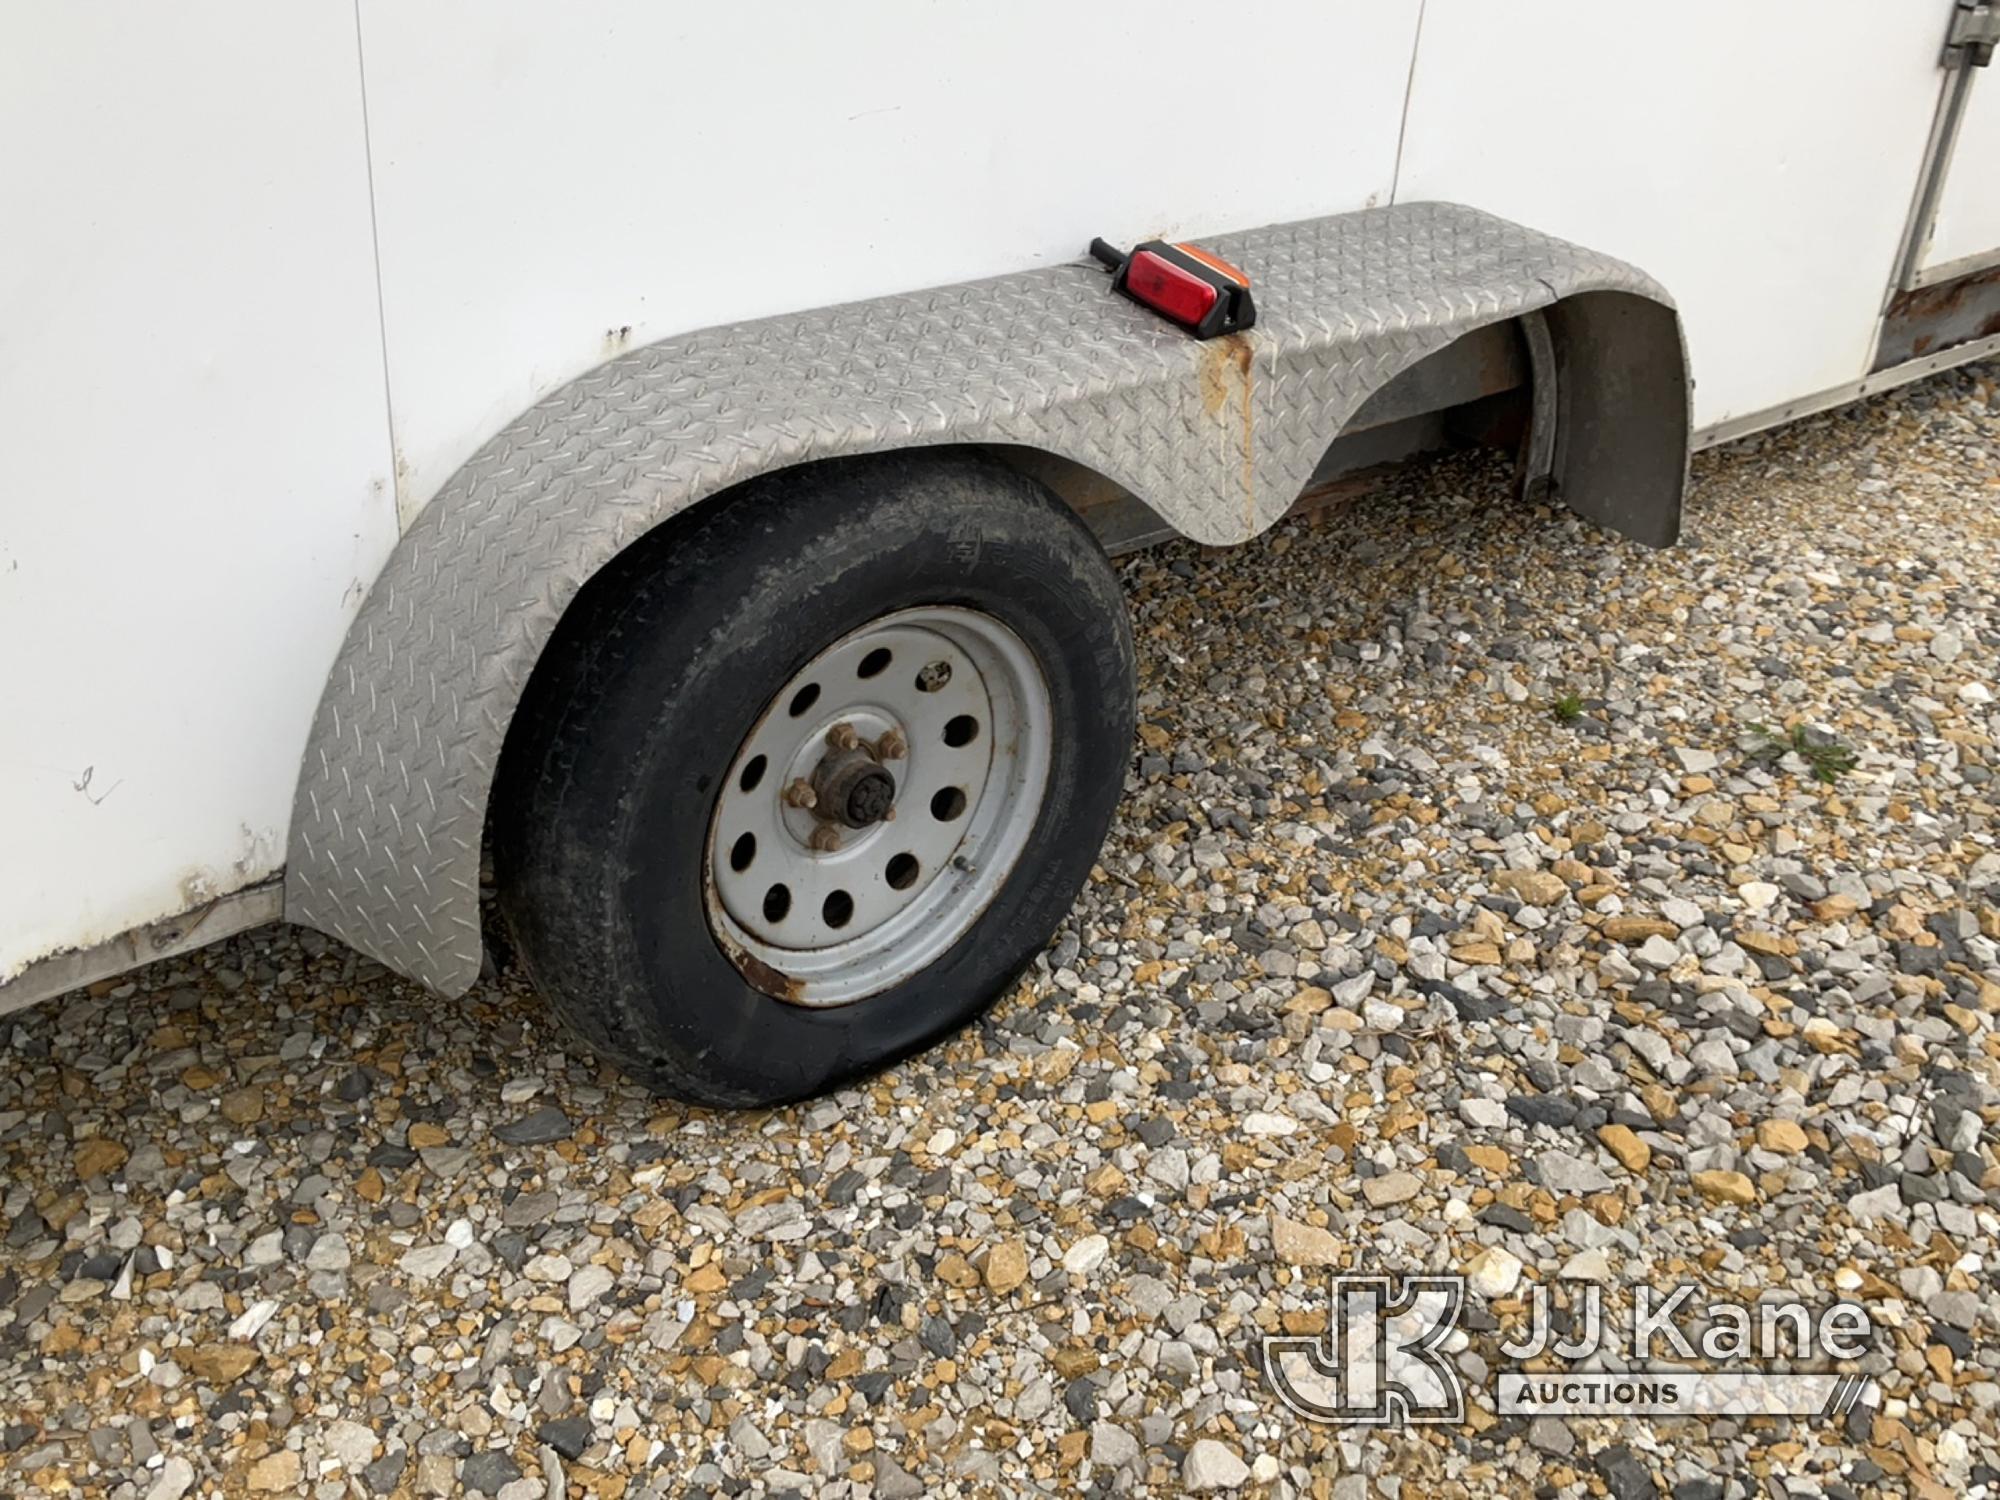 (Hawk Point, MO) 2016 Forest River Enclosed Trailer Missing Axle, Paint & Body Damage) (Seller State